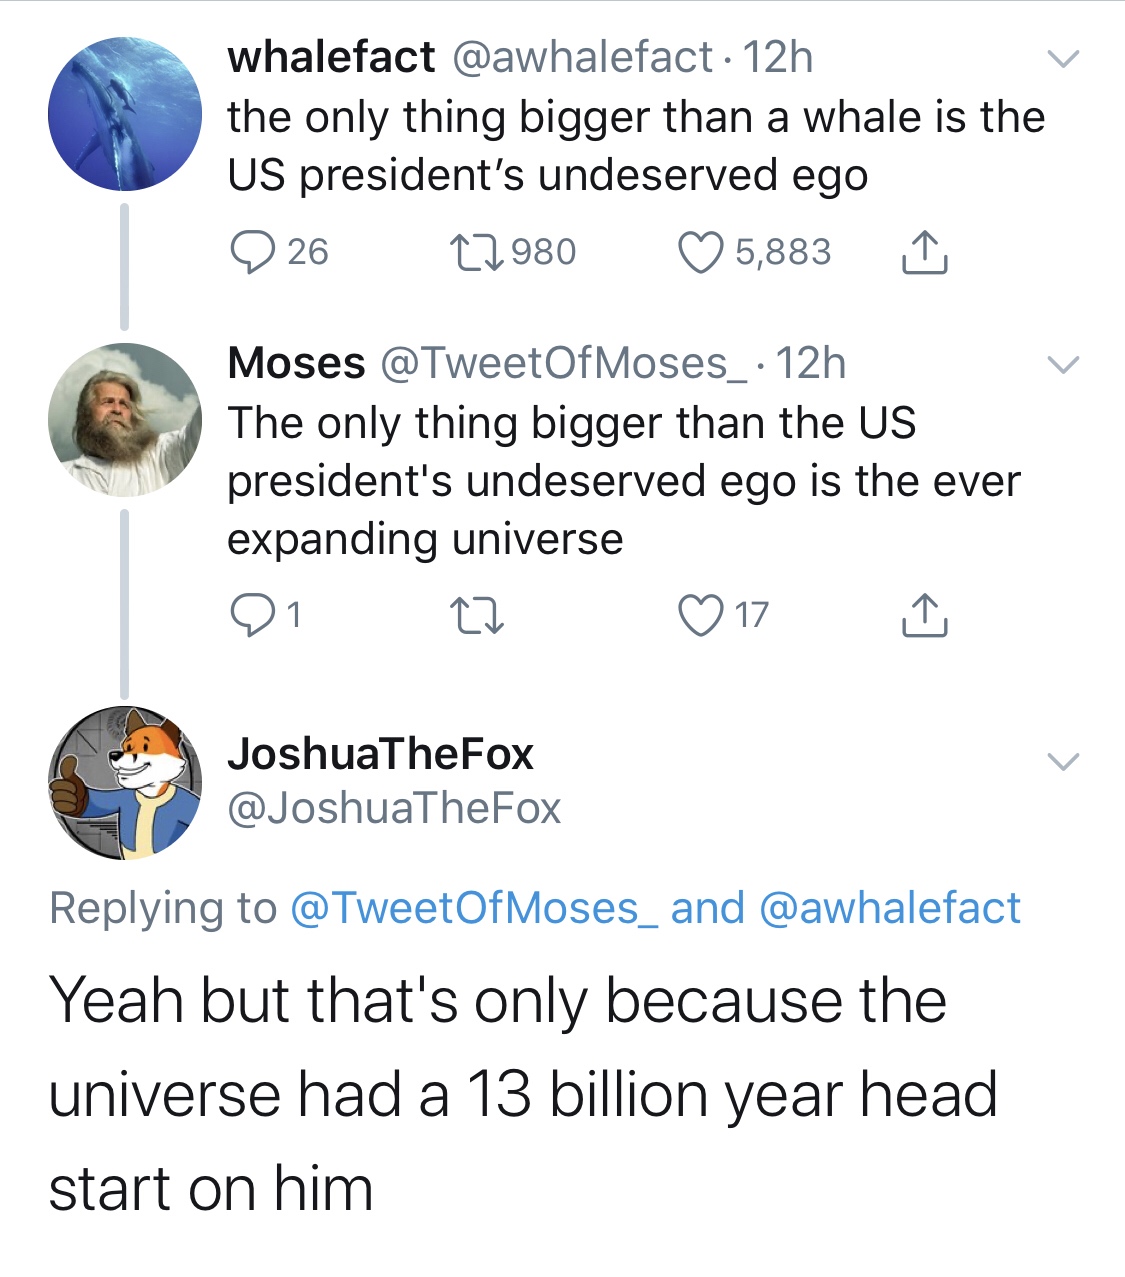 point - whalefact 12h the only thing bigger than a whale is the Us president's undeserved ego 226 22980 5,883 I Moses 12h The only thing bigger than the Us president's undeserved ego is the ever expanding universe 21 22 JoshuaTheFox and Yeah but that's on